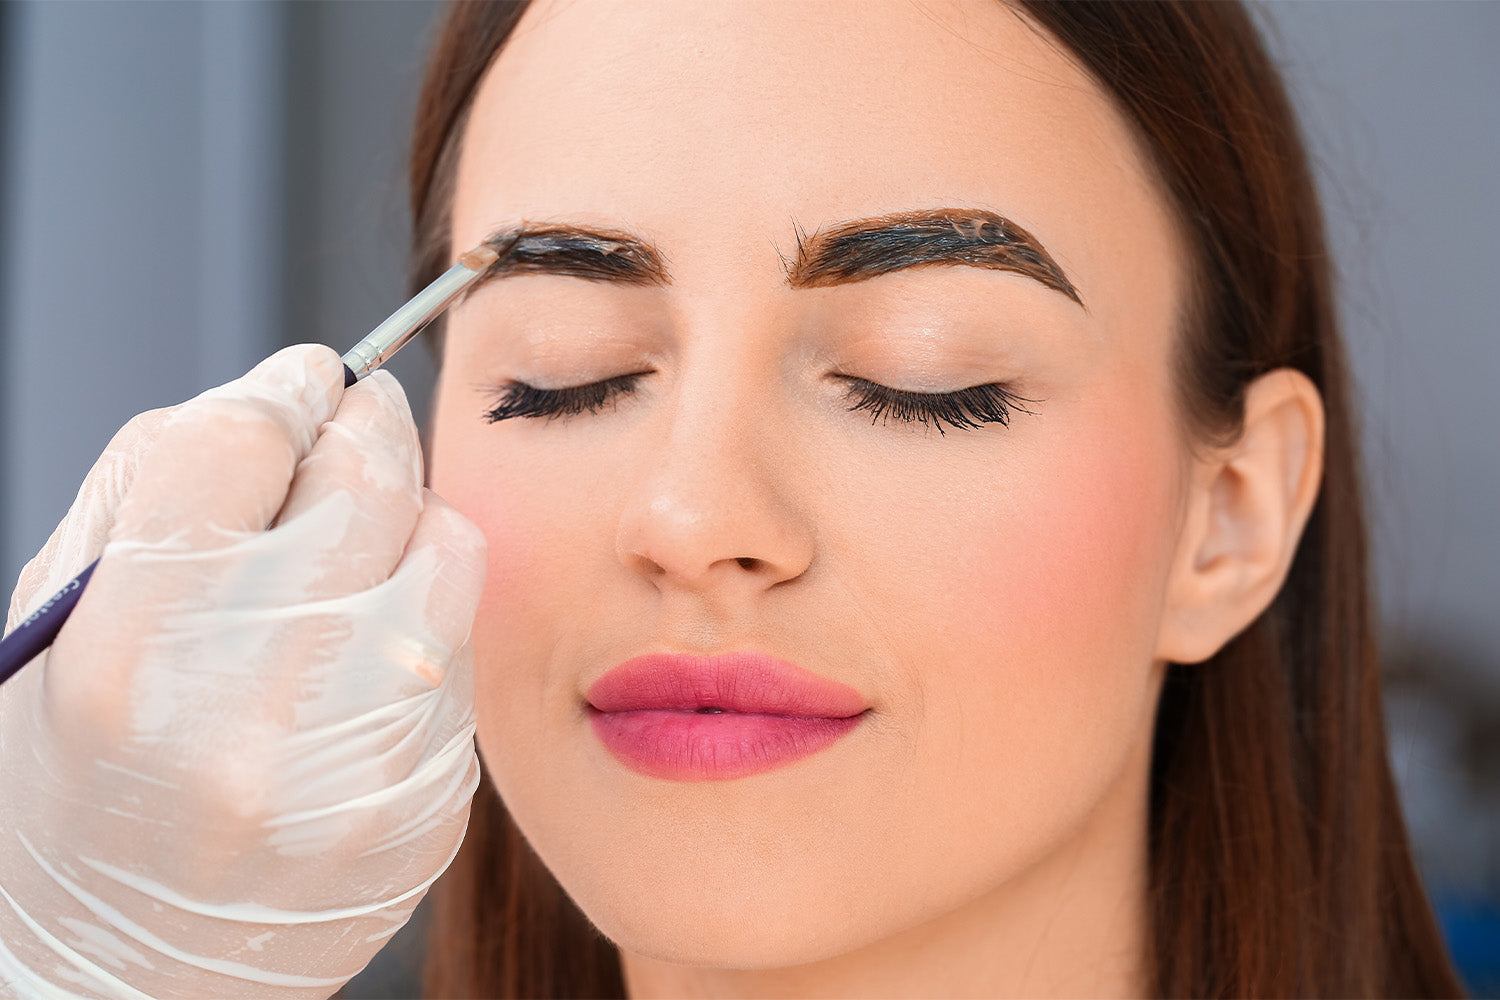 What Are the Benefits of a Lash & Brow Tint?